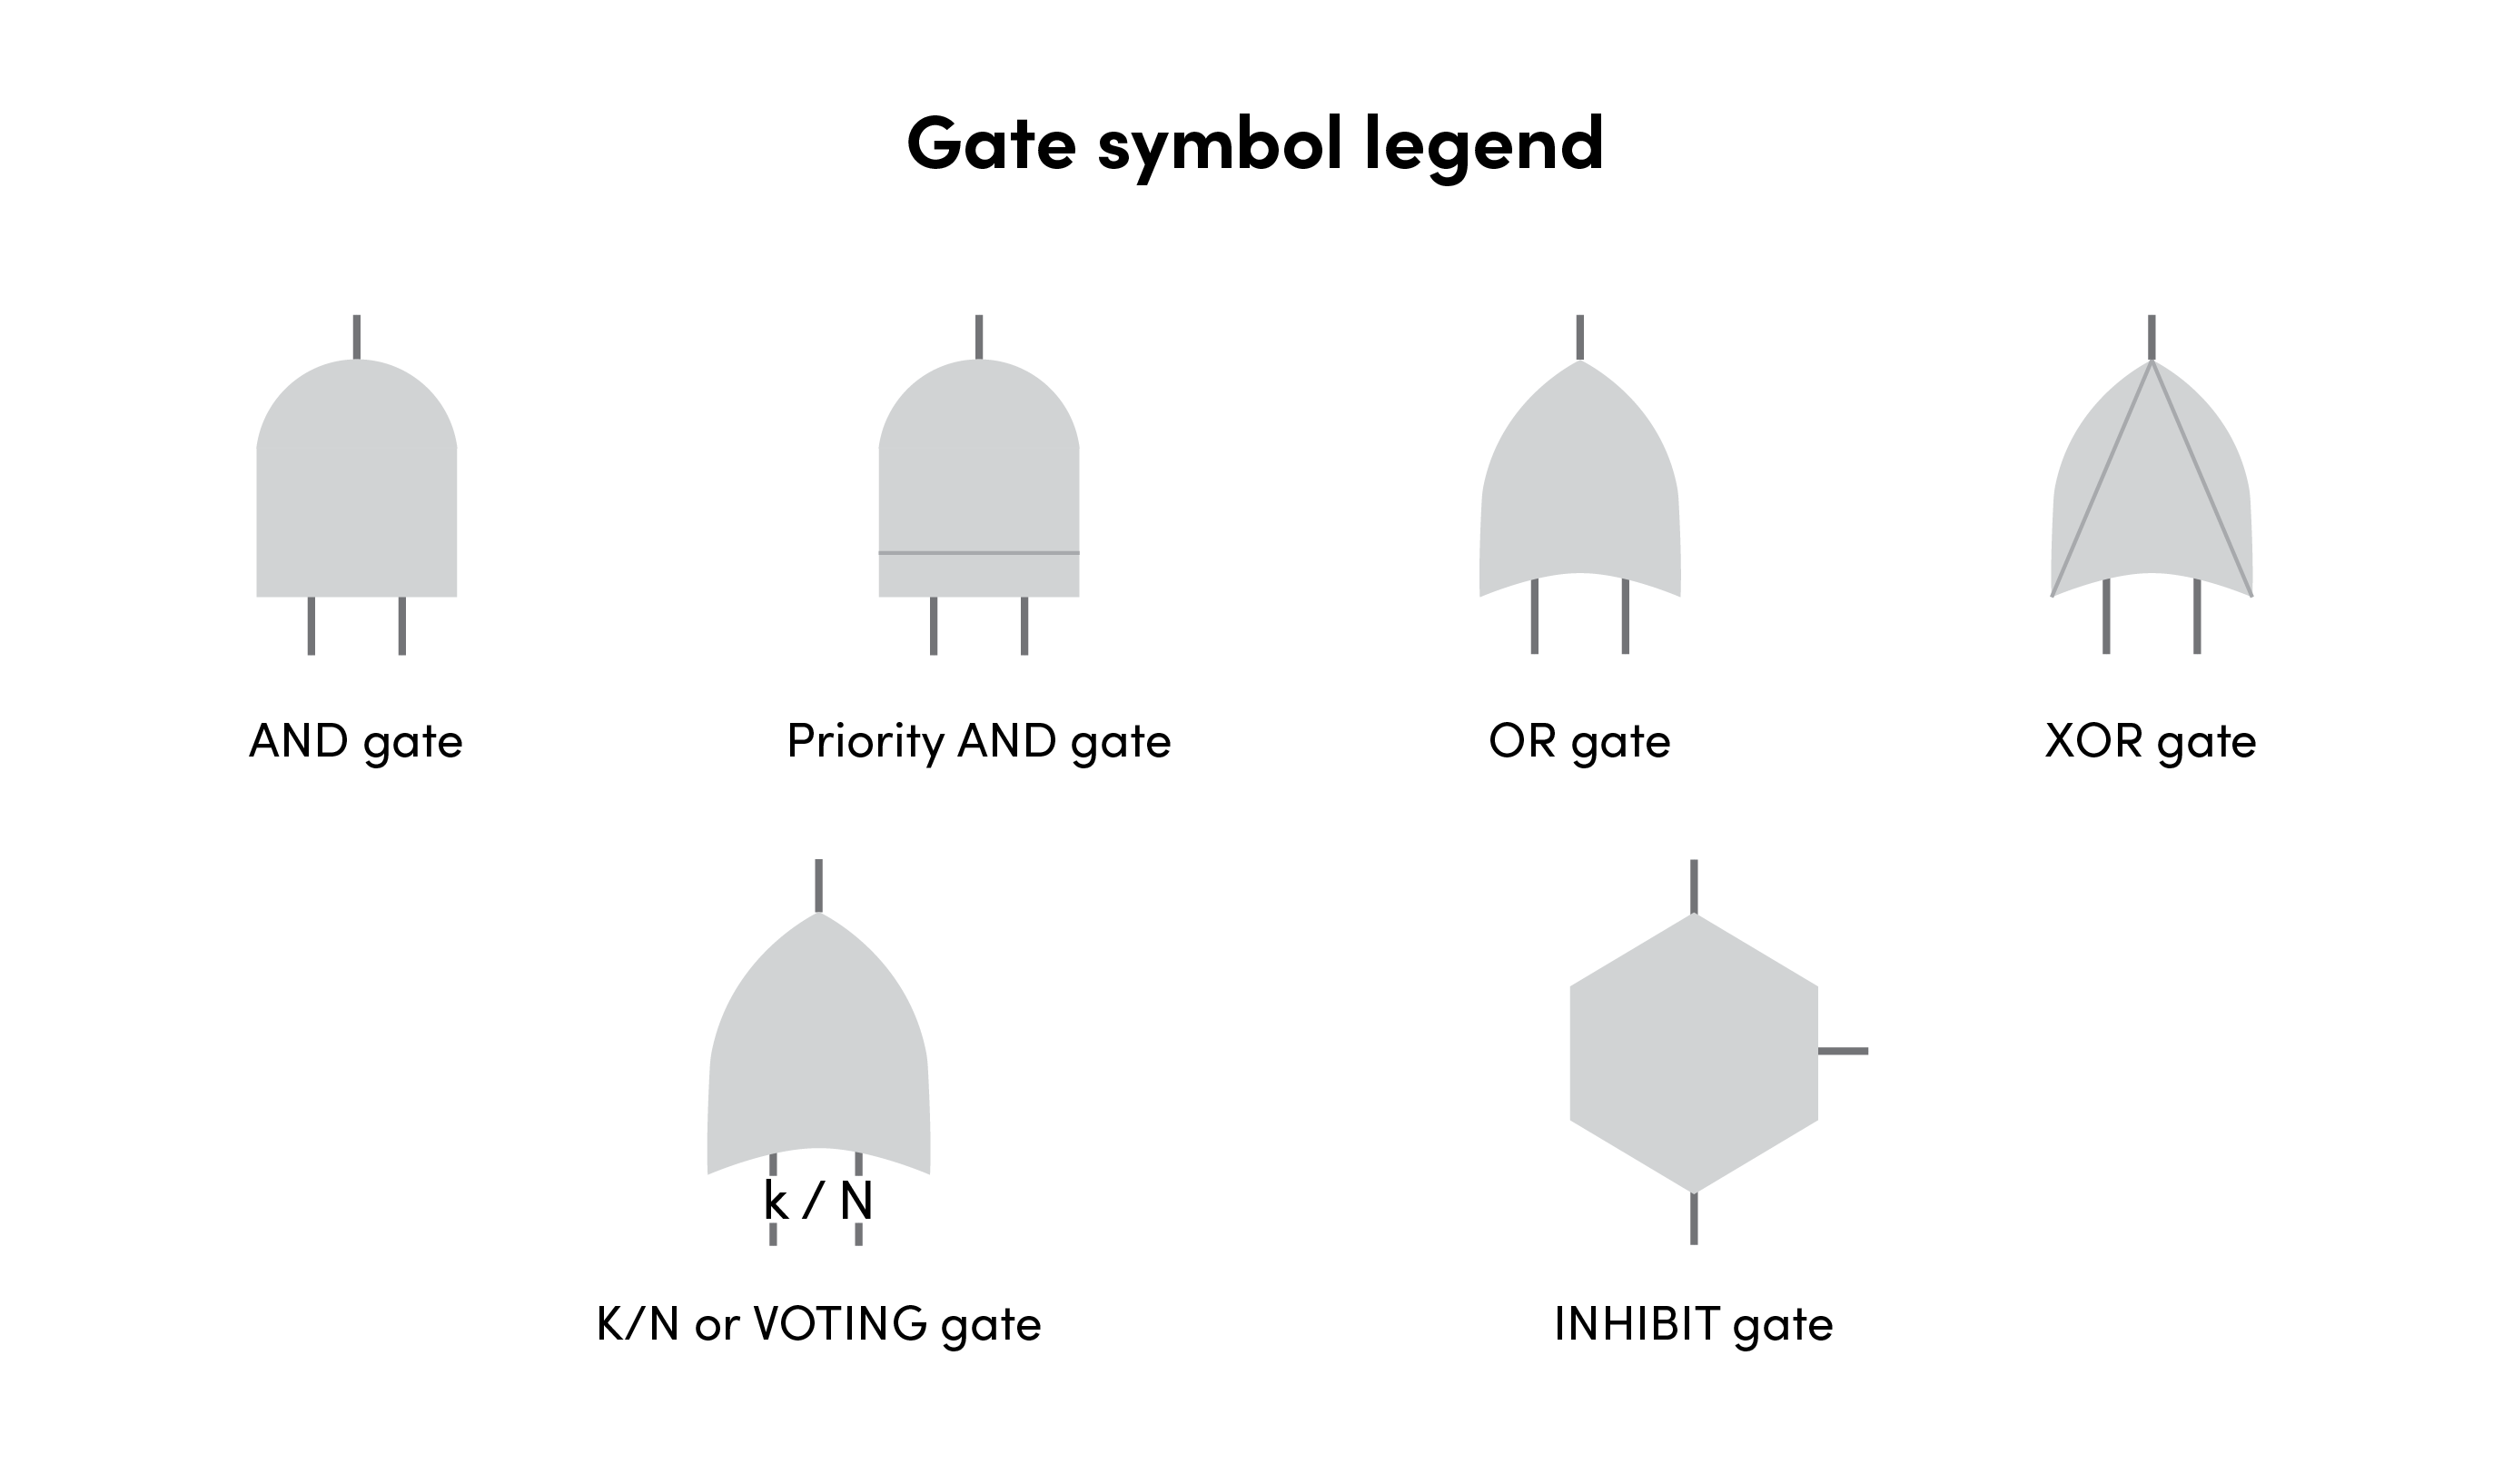 The image shows the types of gates that are used in fault tree diagrams.